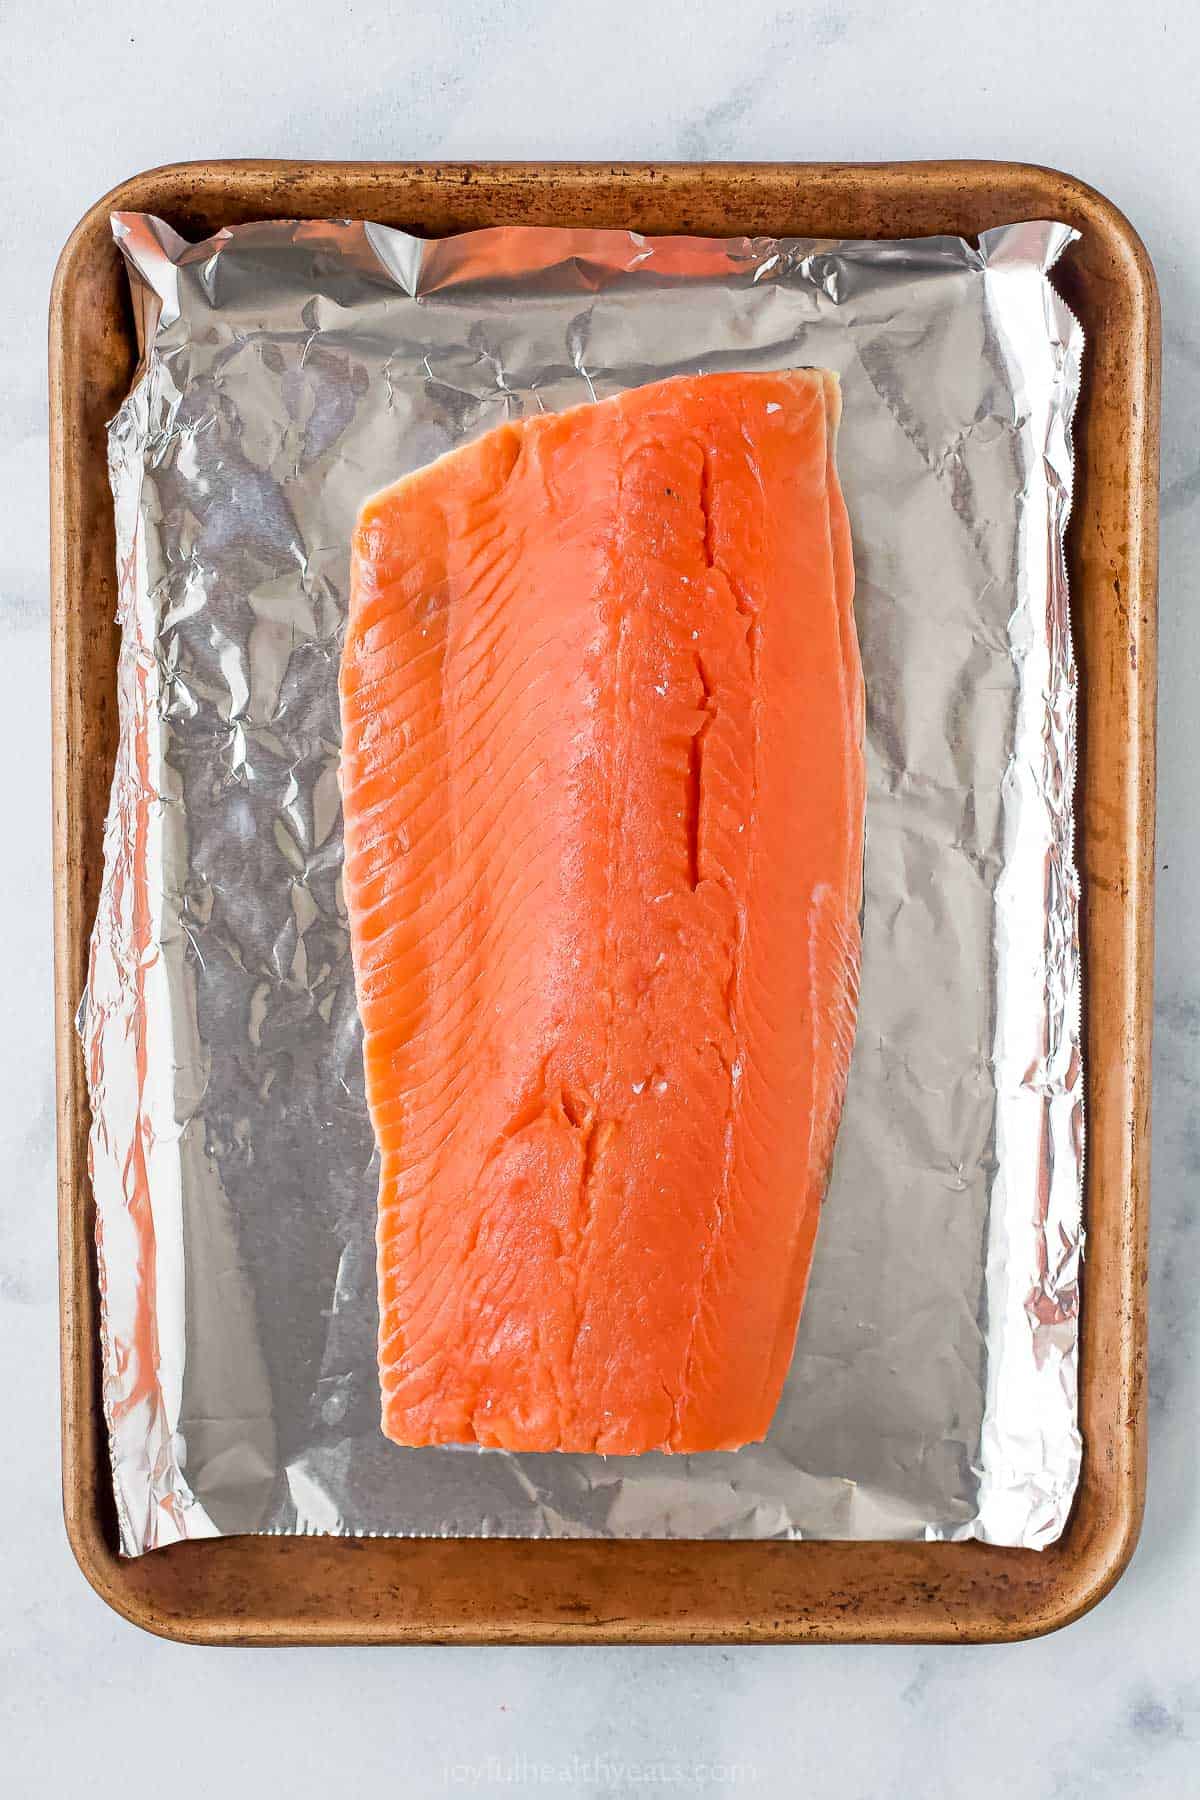 A raw salmon fillet on a baking tray lined with a sheet of aluminum foil